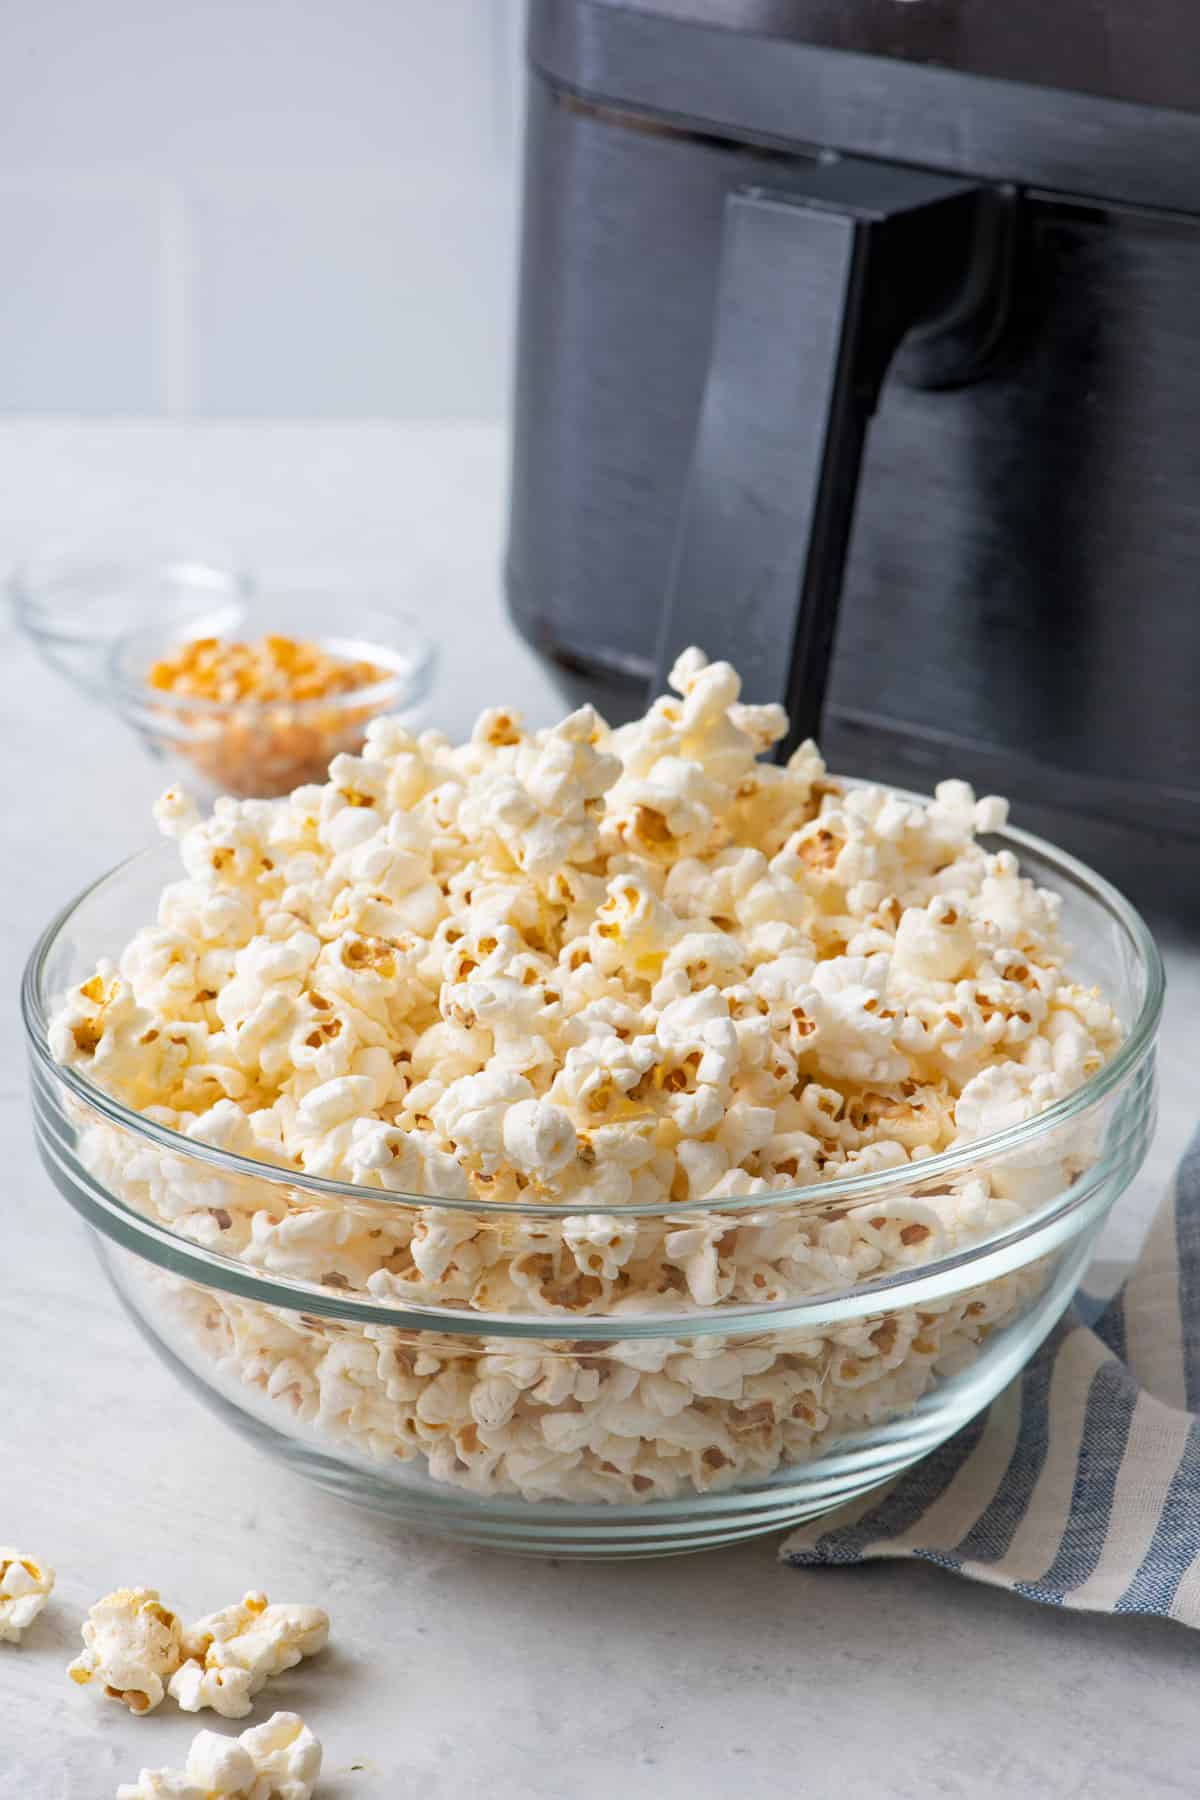 Popcorn in a serving bowl piled high with an air fryer behind it.